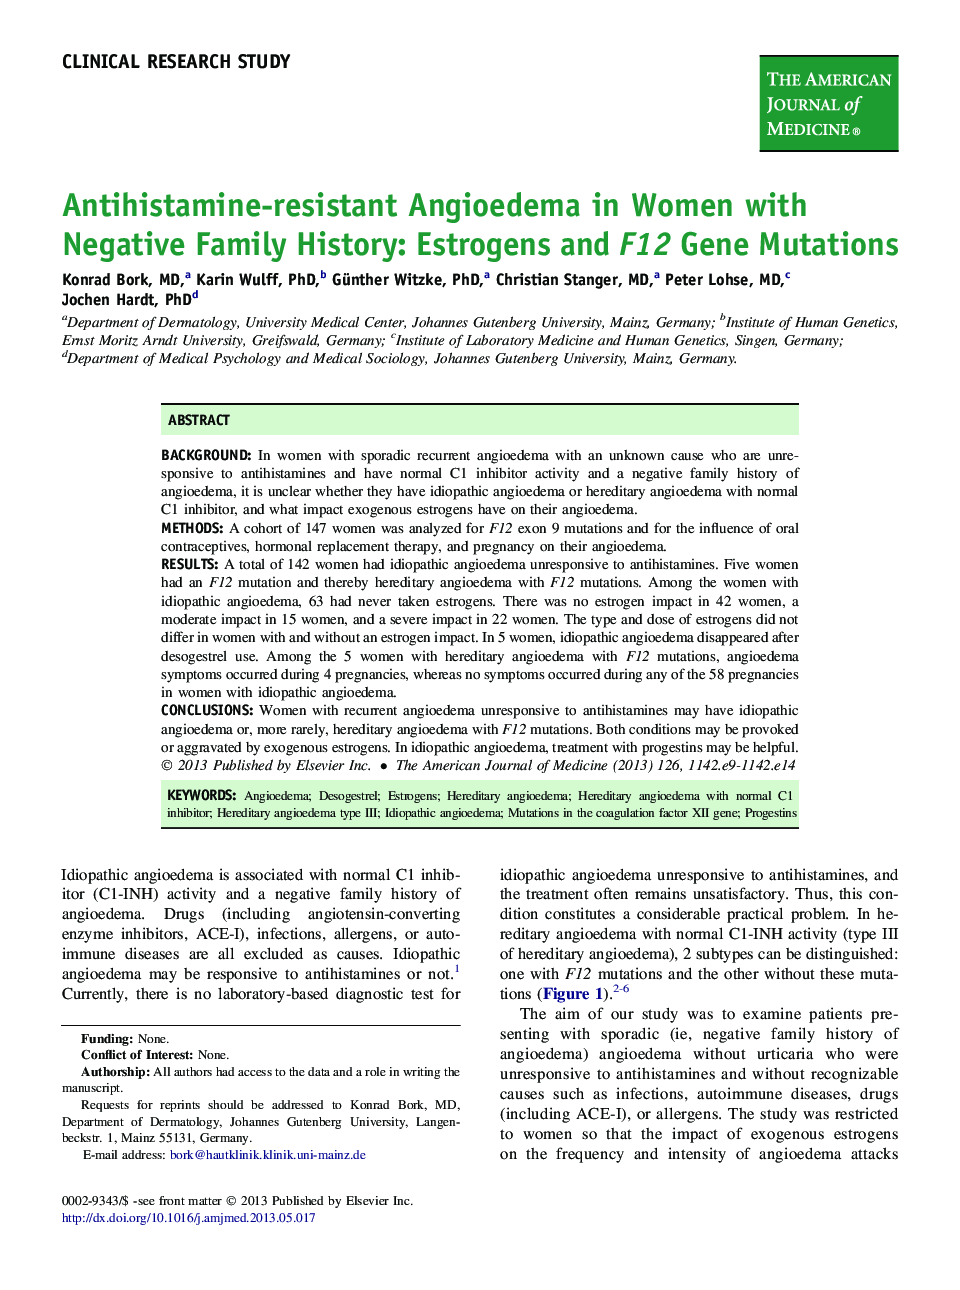 Antihistamine-resistant Angioedema in Women with Negative Family History: Estrogens and F12 Gene Mutations